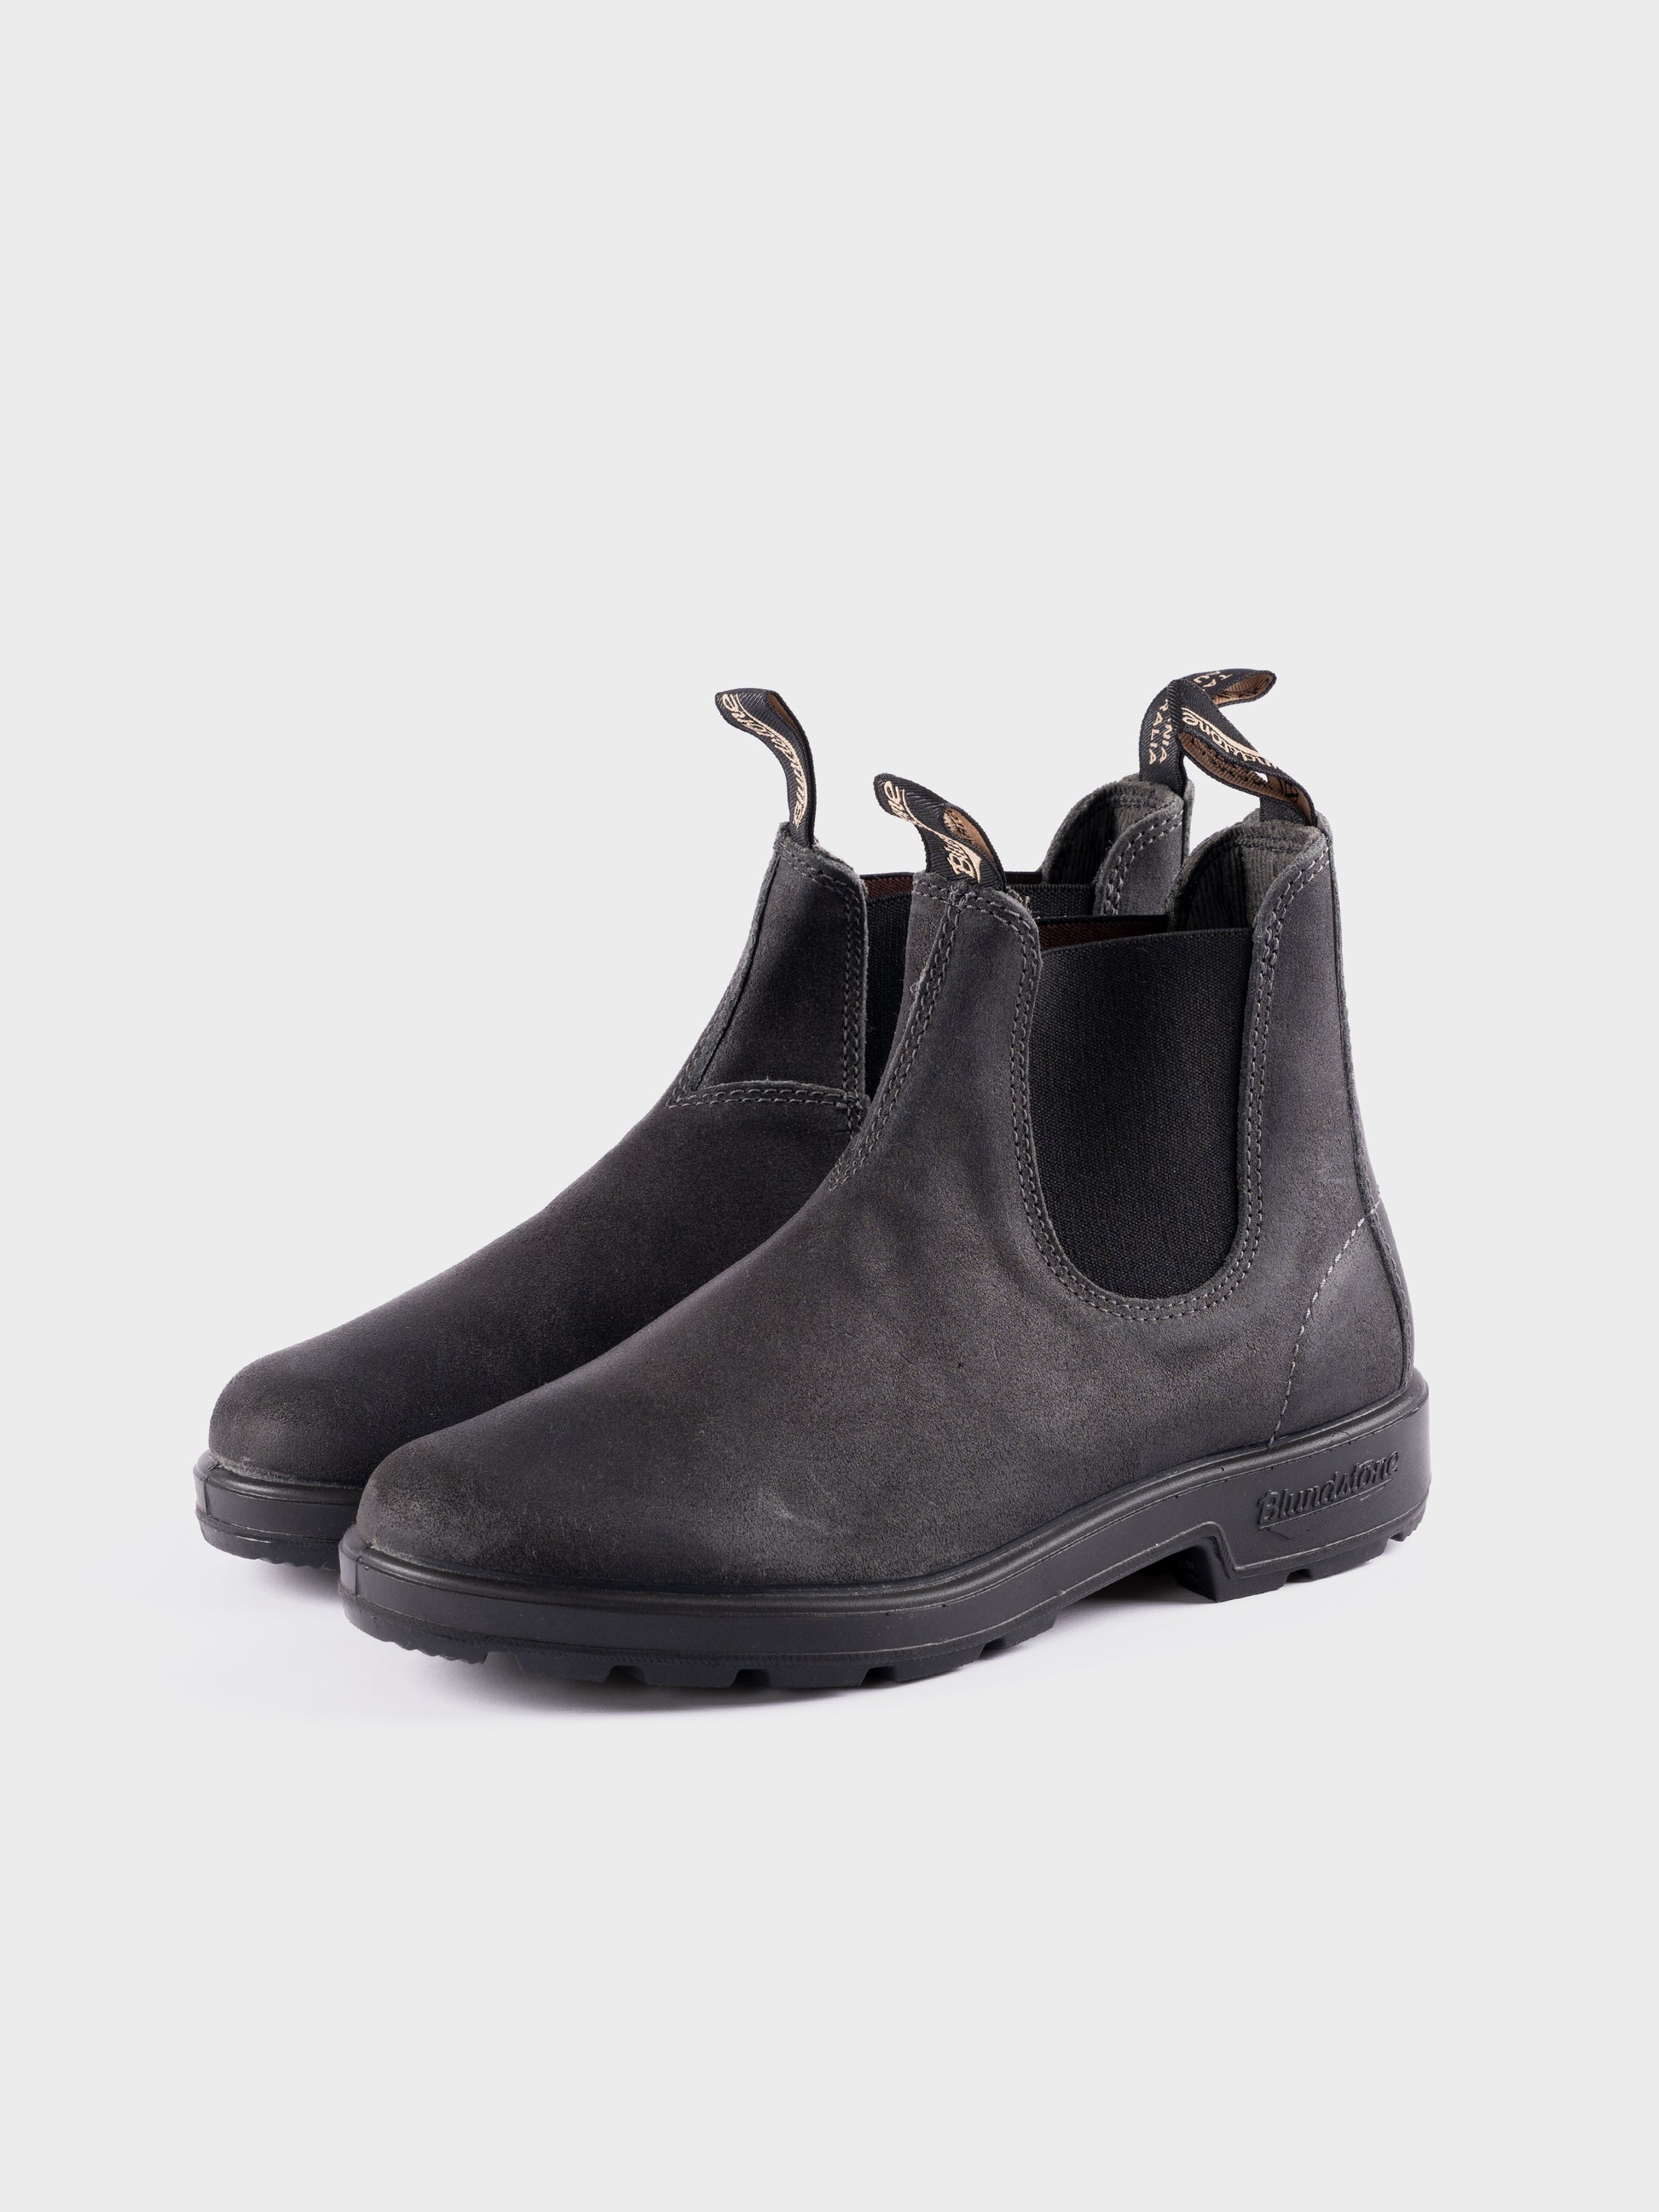 Blundstone Boots - 1910 Steel Grey Leather